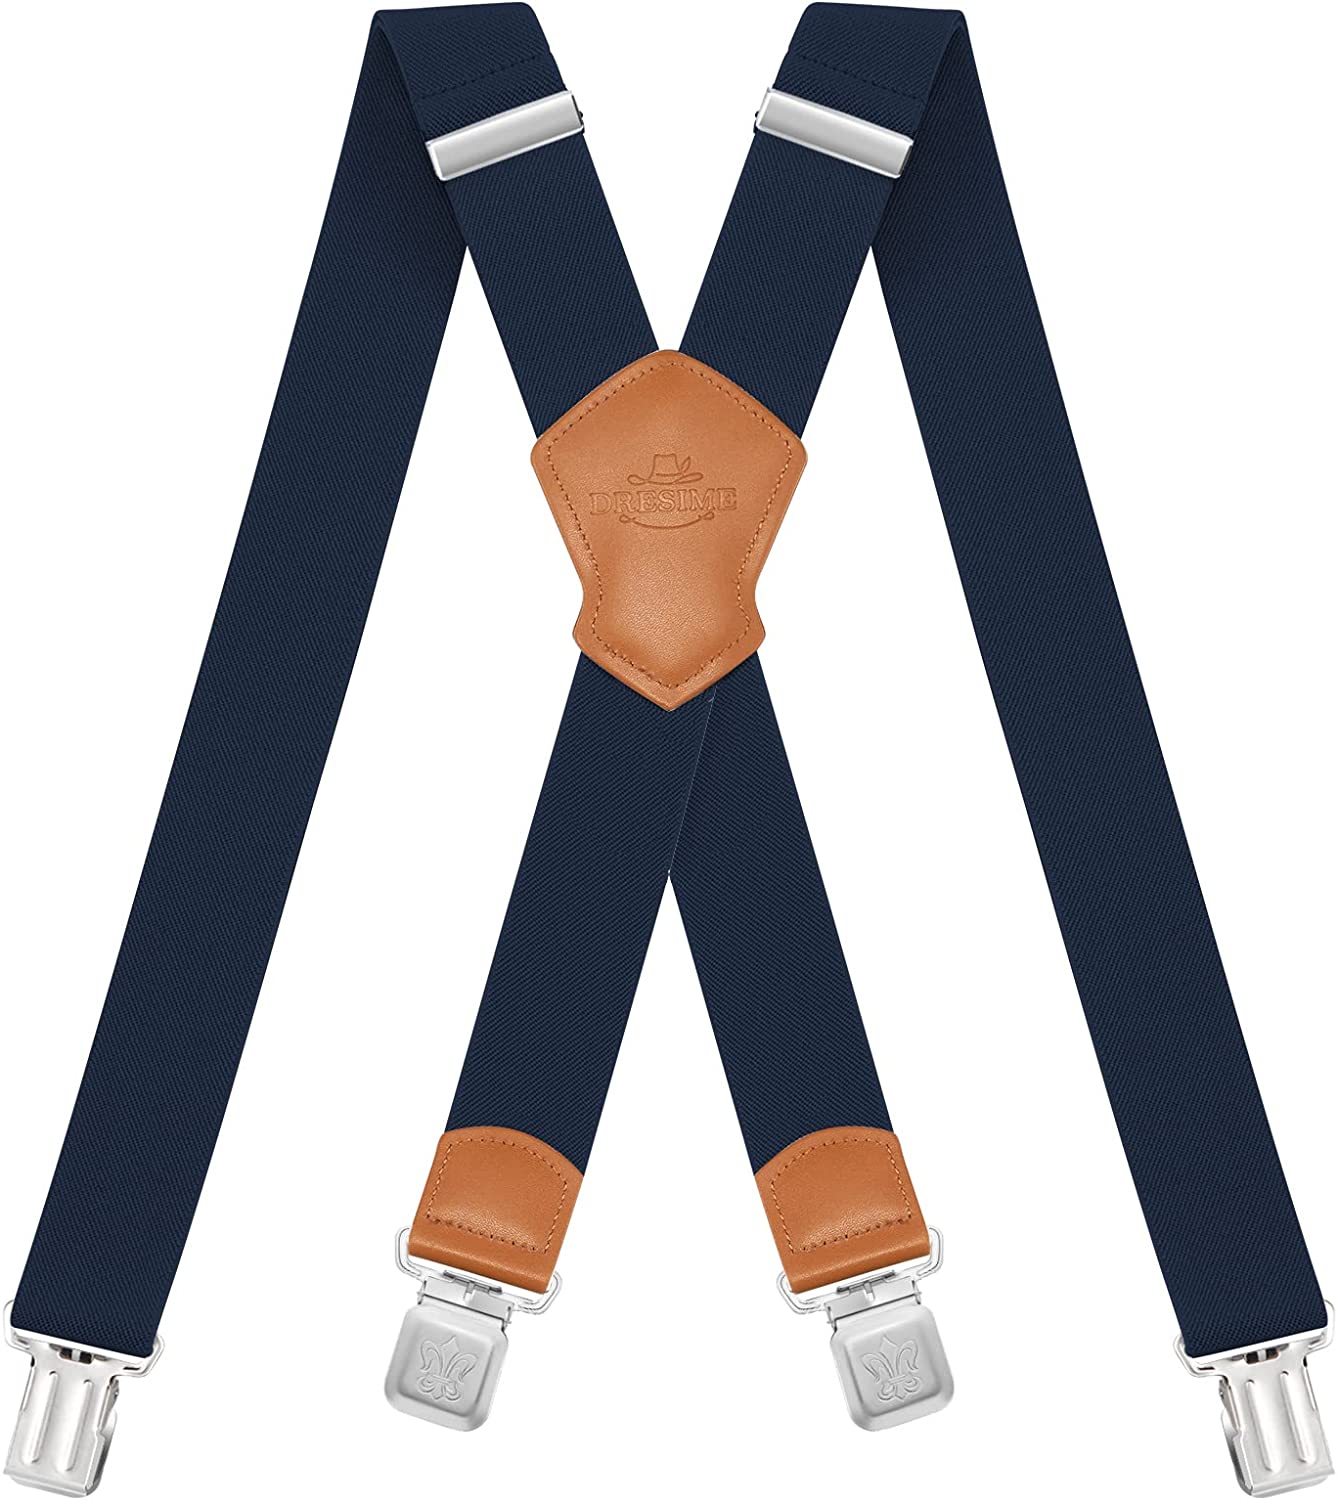 Adjustable Elastic Suspenders for Men's and Women's with X Back Suspenders  for Casual & Formal